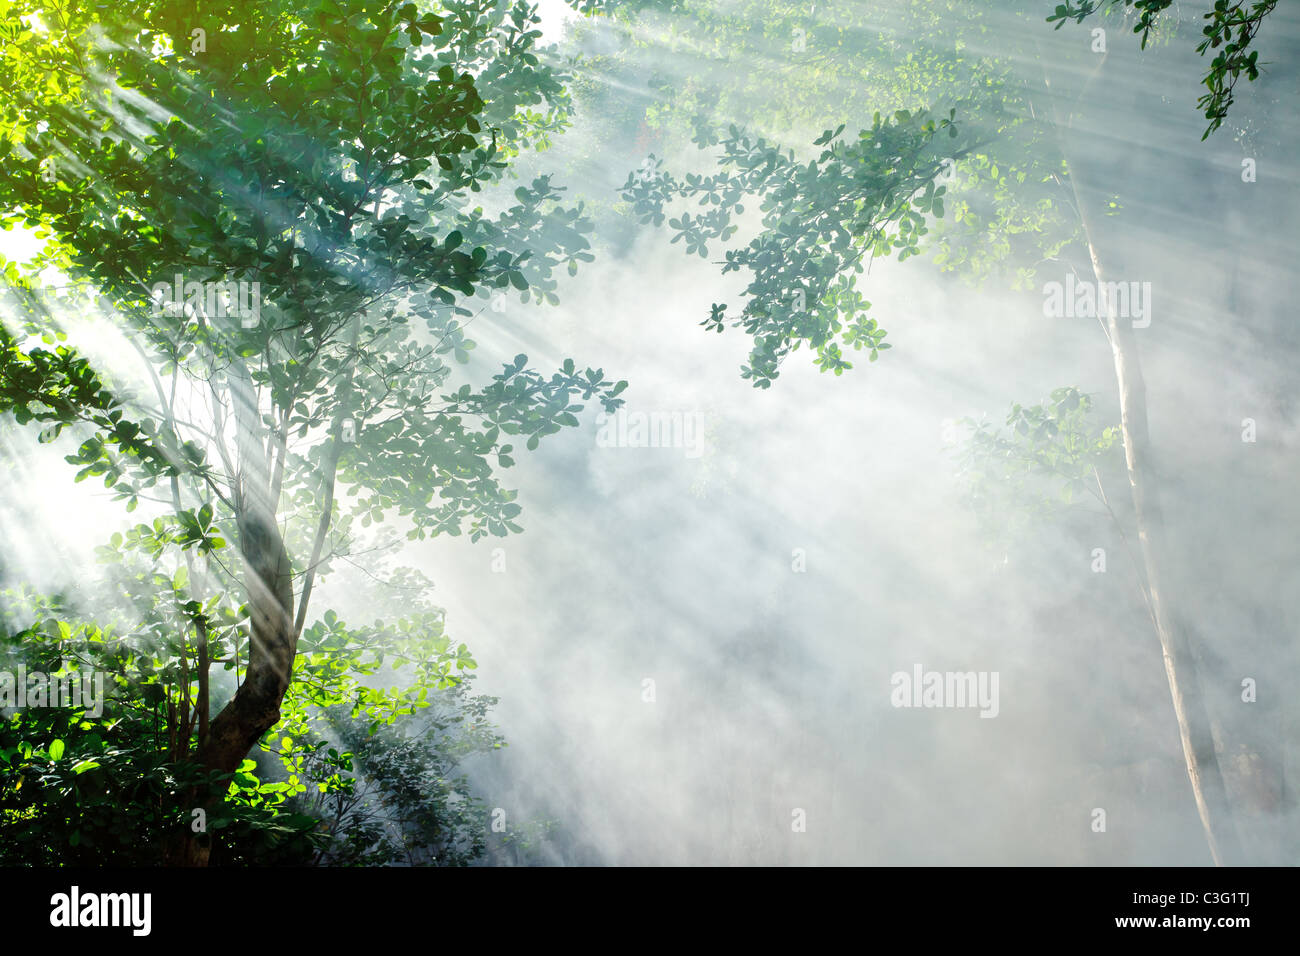 morning sunbeam in tropical fairy forest with smoke, ko laoliang island, thailand Stock Photo